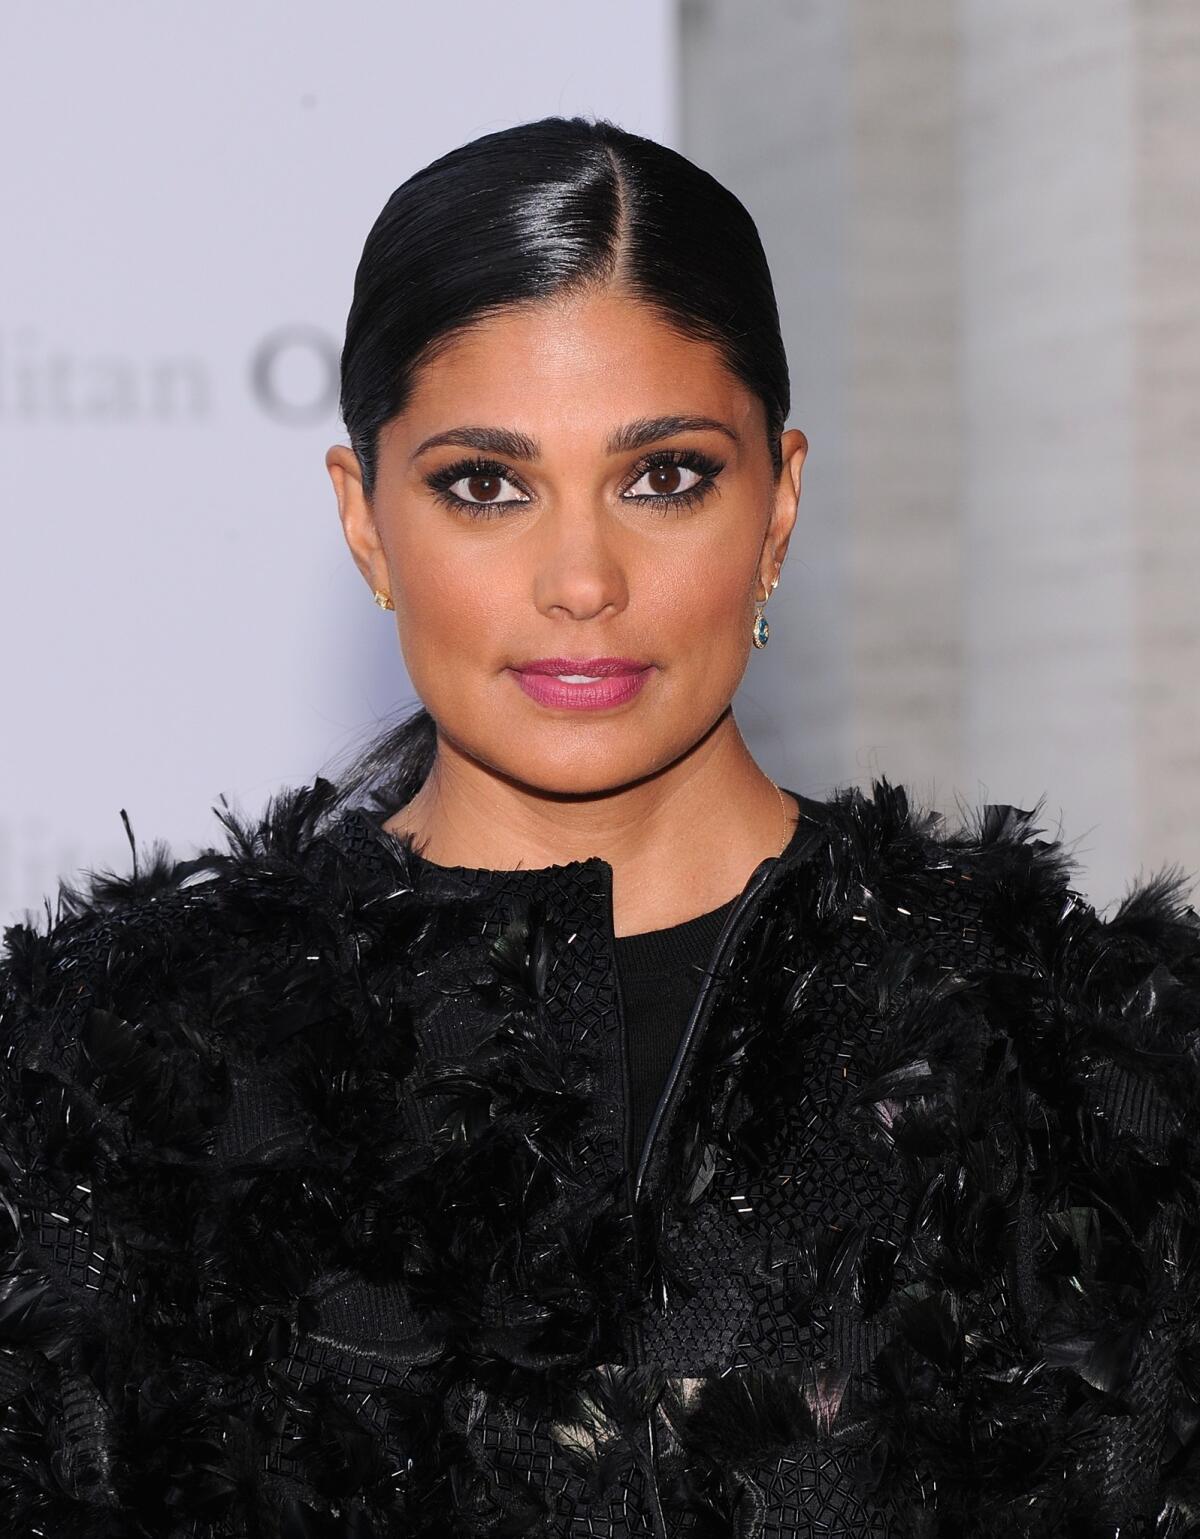 Designer Rachel Roy will show off her fall fashion picks in a trunk show Saturday at Macy's at the Beverly Center.